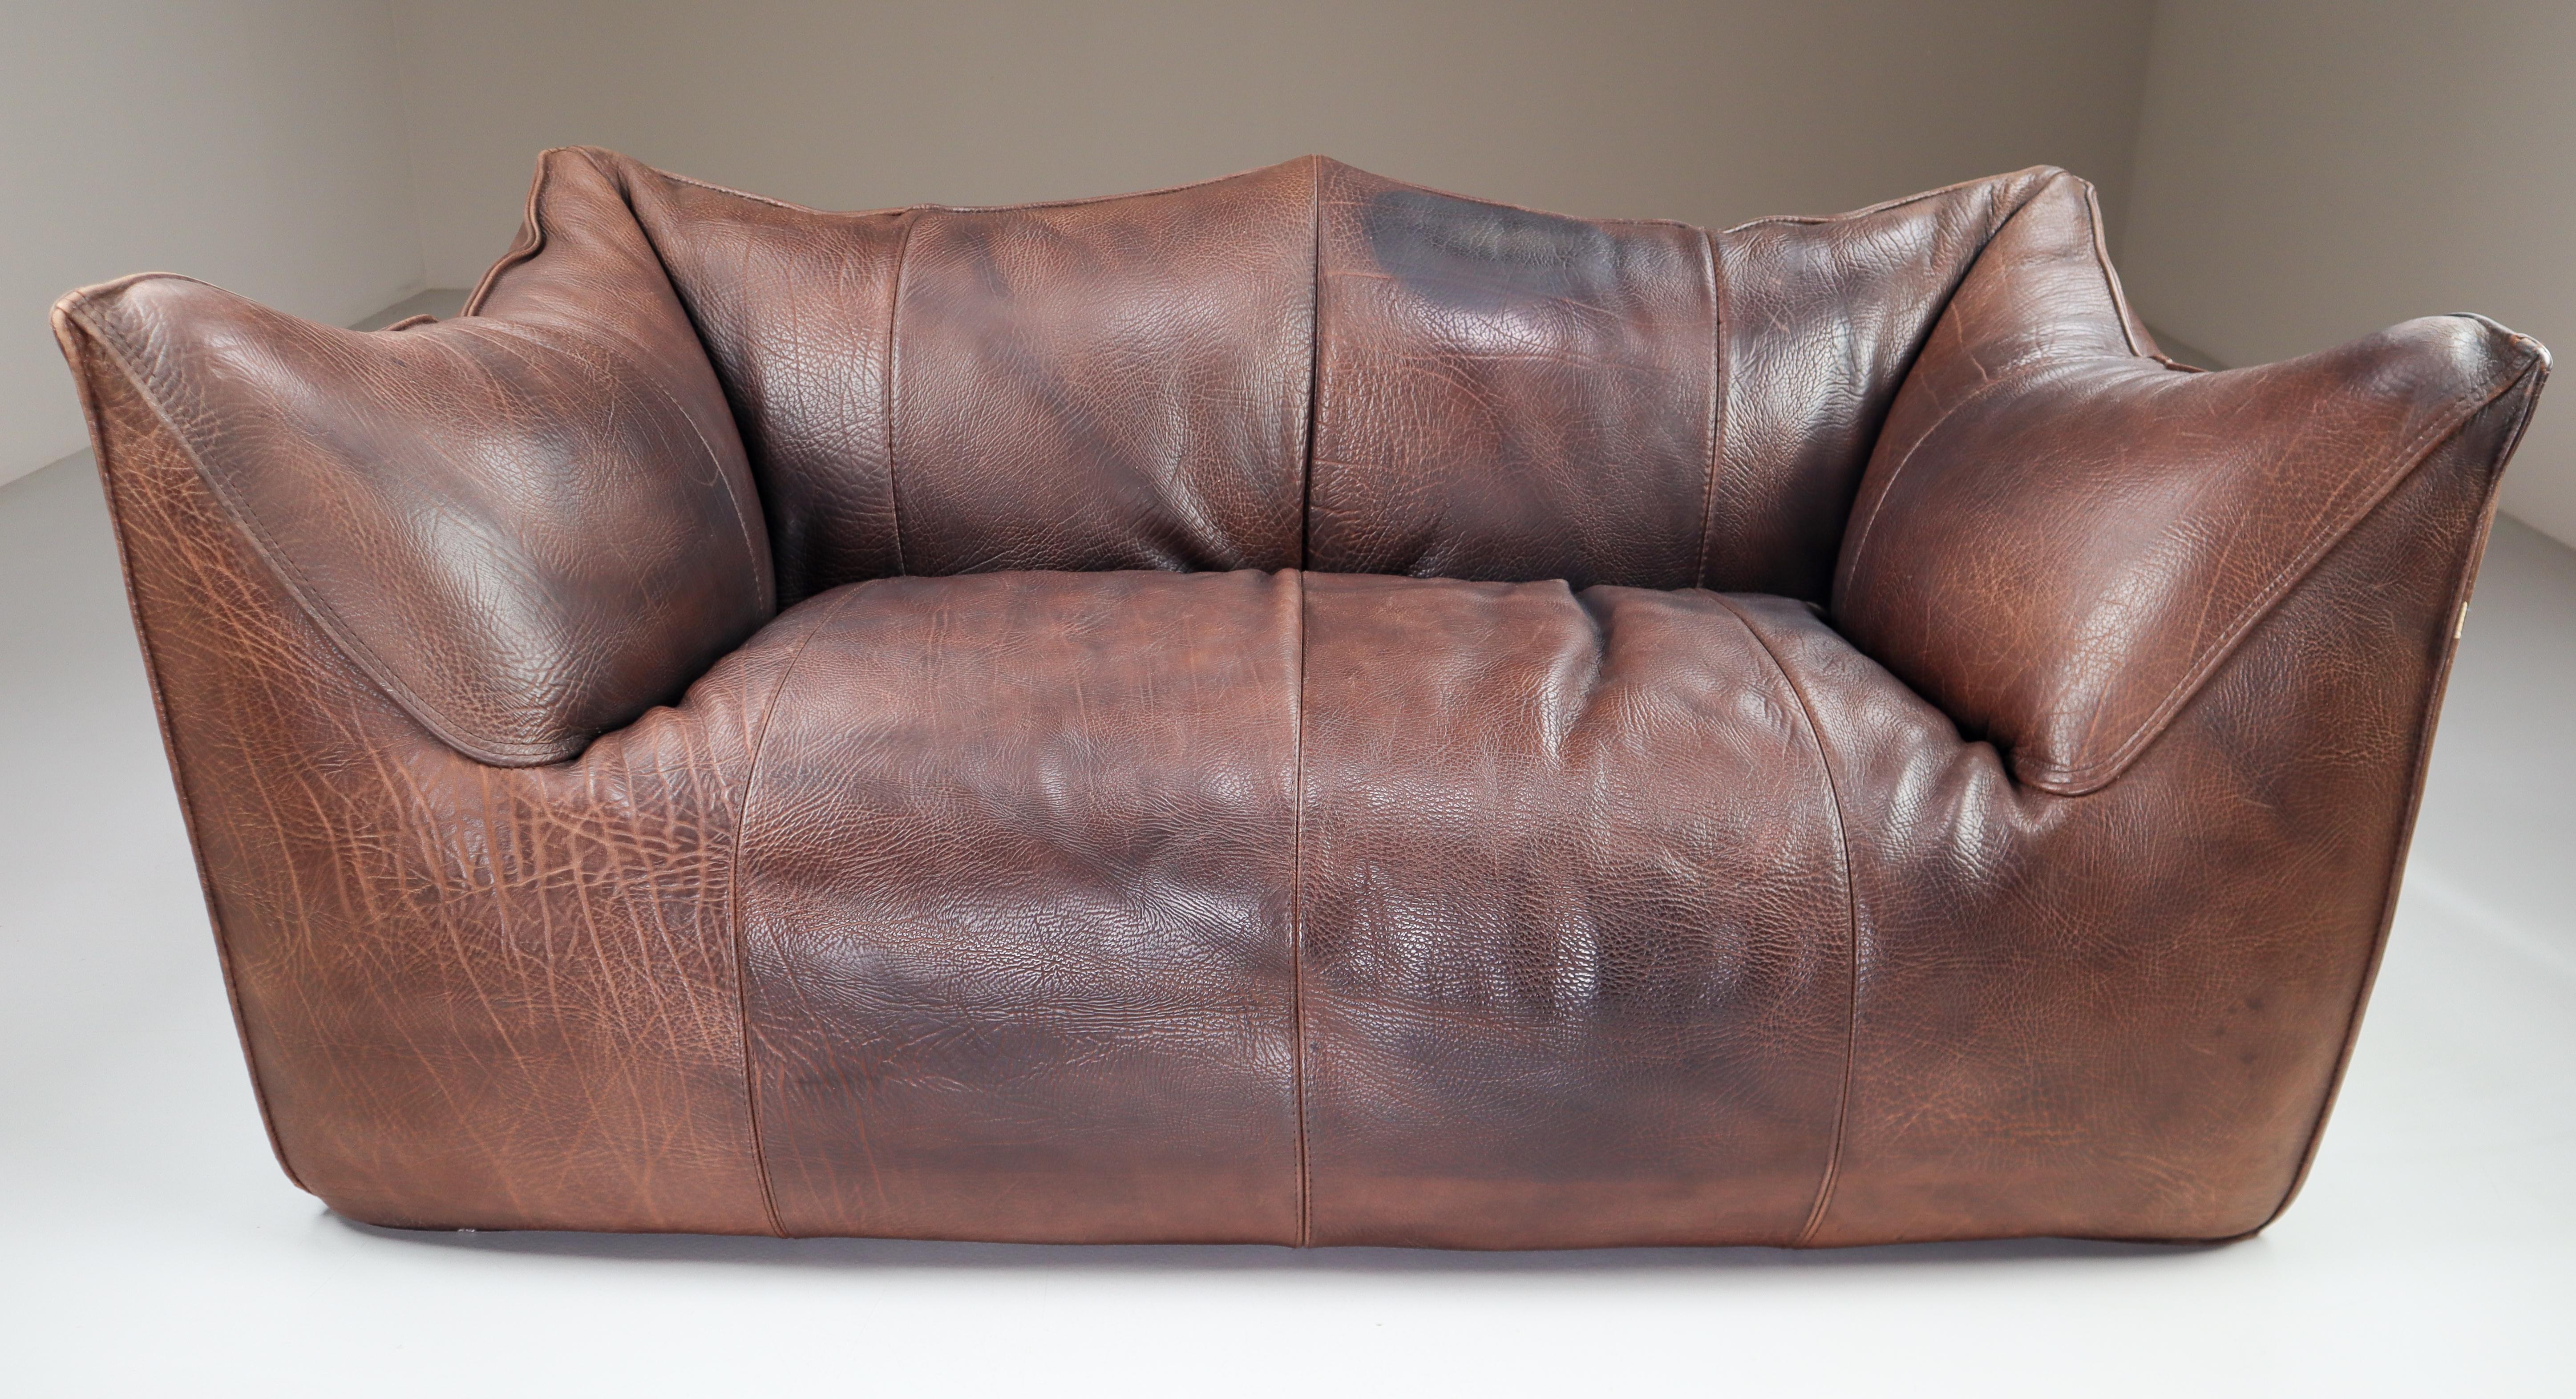 Original patinated neck leather two-seat sofa “Le Bambole” by Mario Bellini for B & B Italia. Manufactured in Italy during the 1970s. Really comfortable sofa in original thick chocolate neck leather. Almost 50 years old, but the sofa remains in good